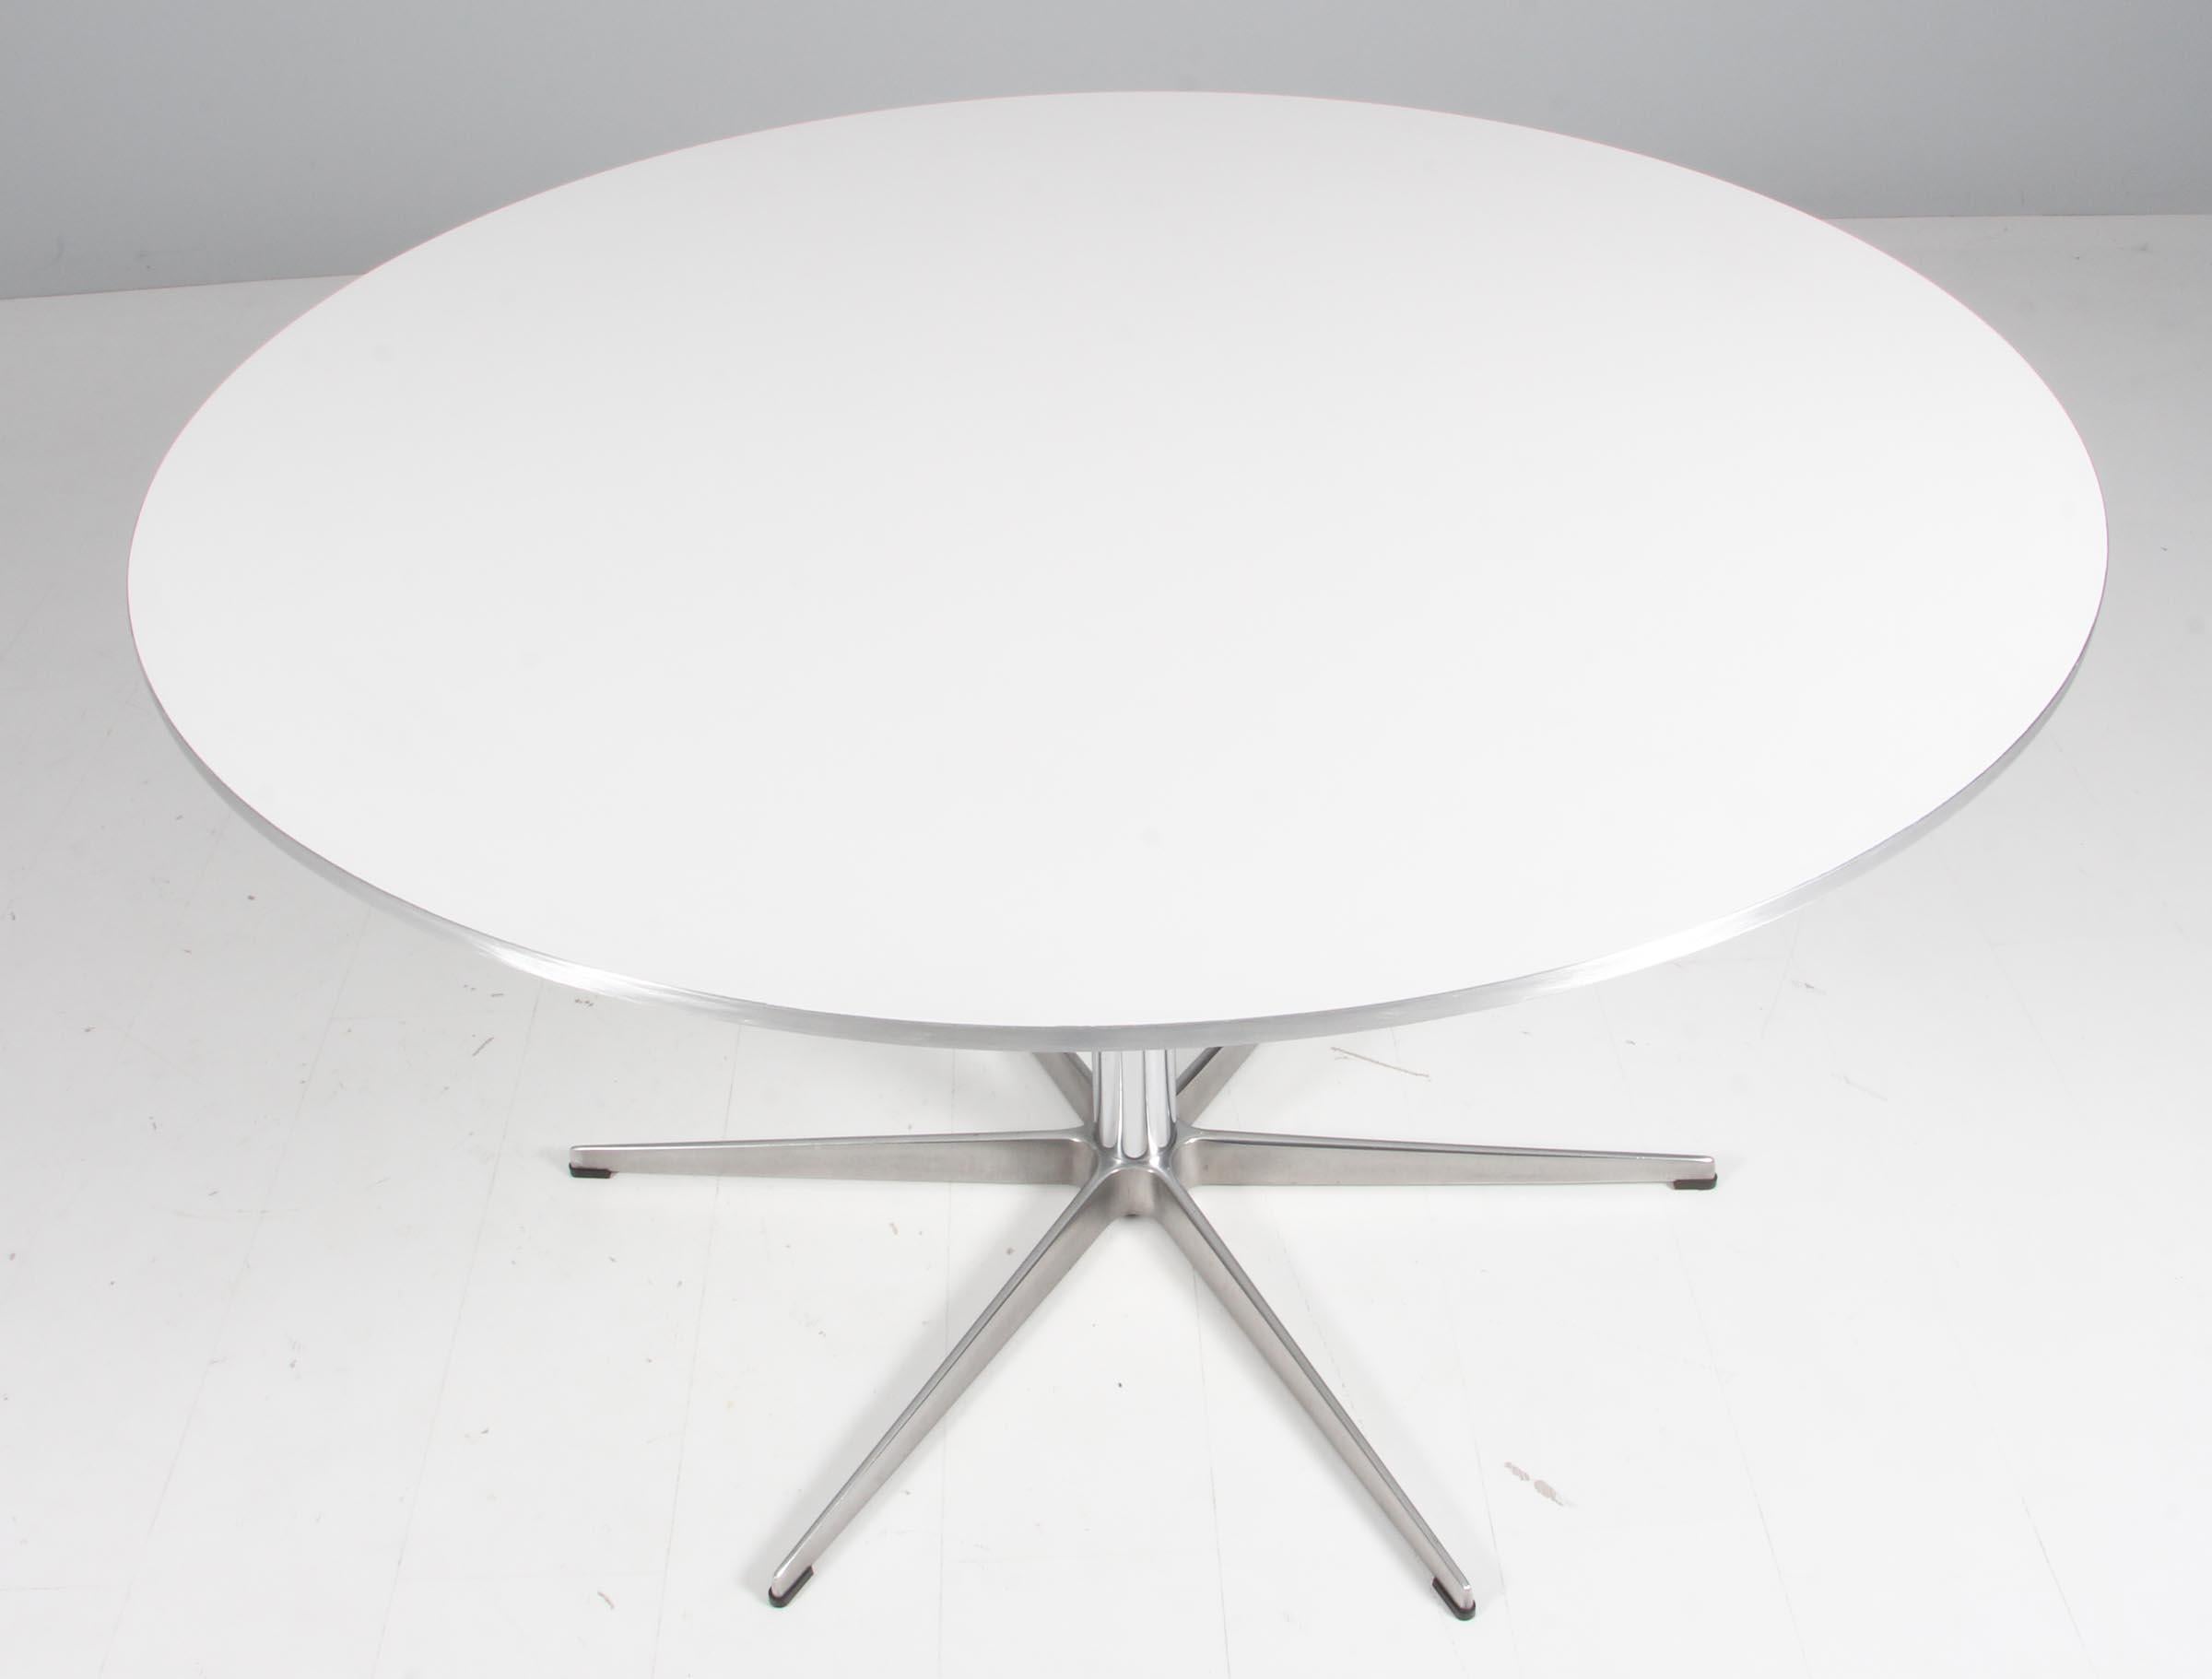 Piet Hein & Arne Jacobsen dining table with new laquered white top.

six star base of aluminium and steel.

Made by Fritz Hansen.